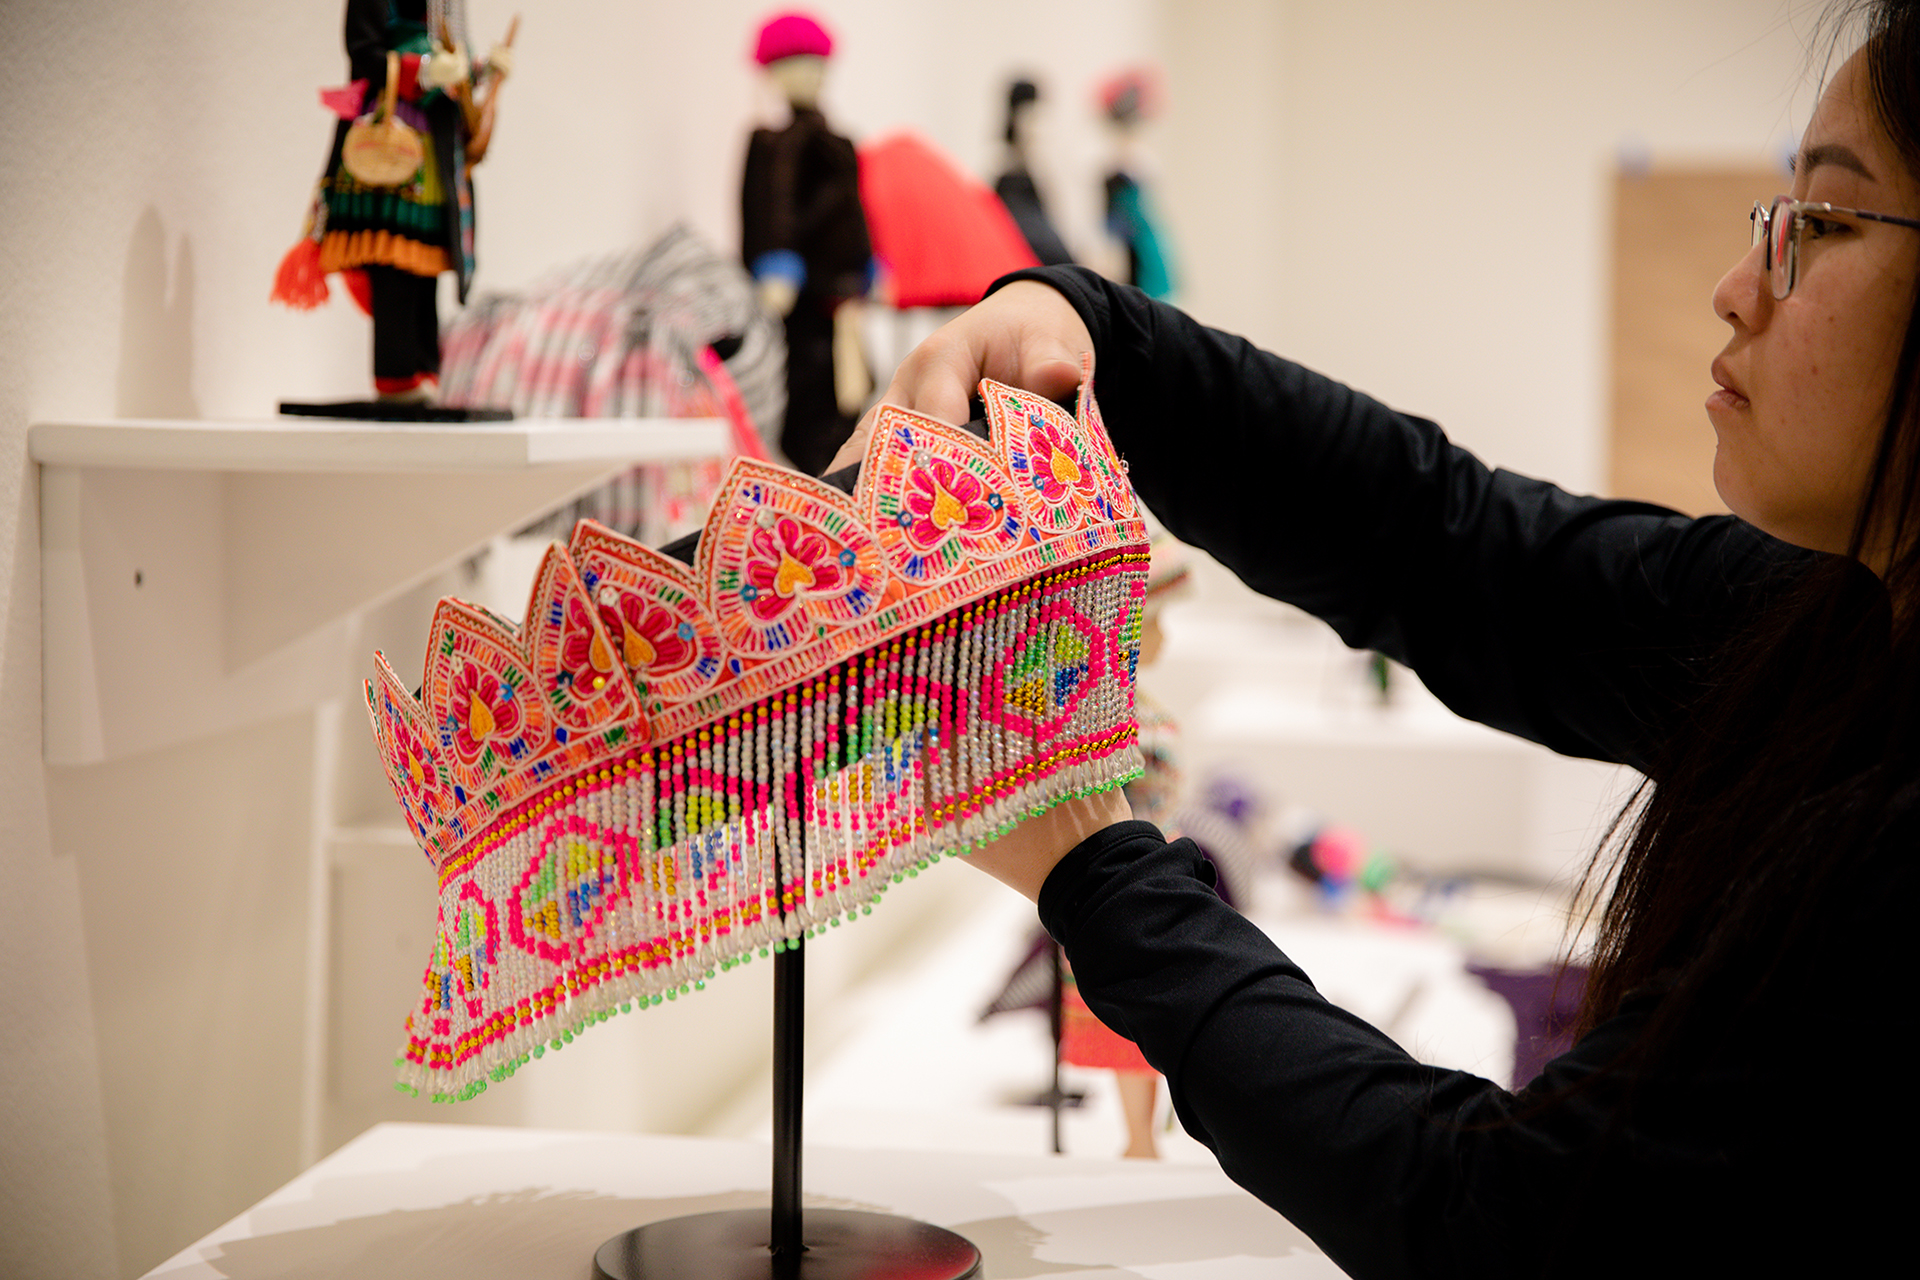 A woman adjusts a Hmong headpiece, decorated in orange, pink, blue, green and other beads, on display as part of an exhibit at Sac State.